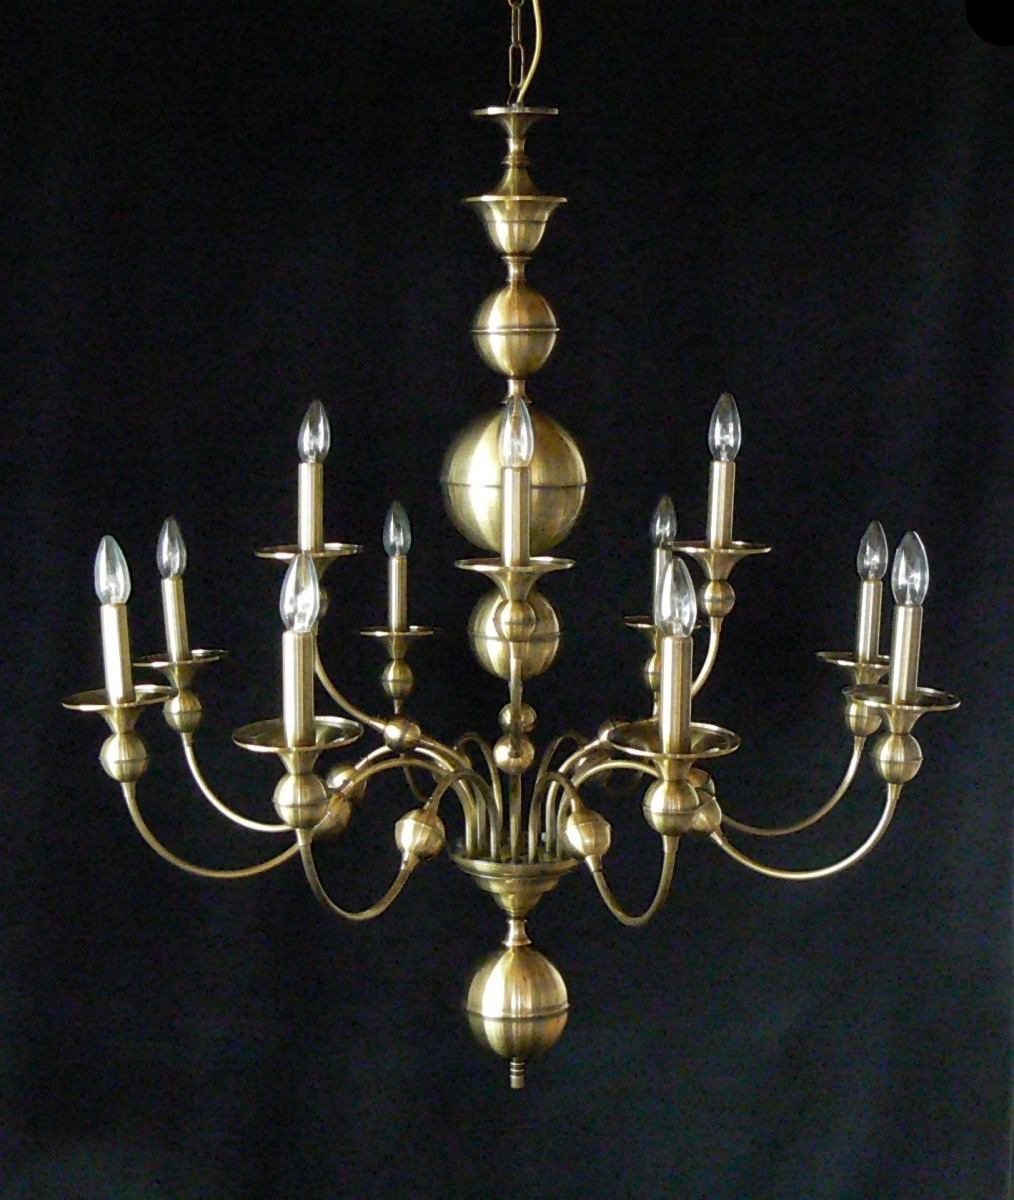 12-arm stained Dutch chandelier made of manually pressed brass parts ANTIK